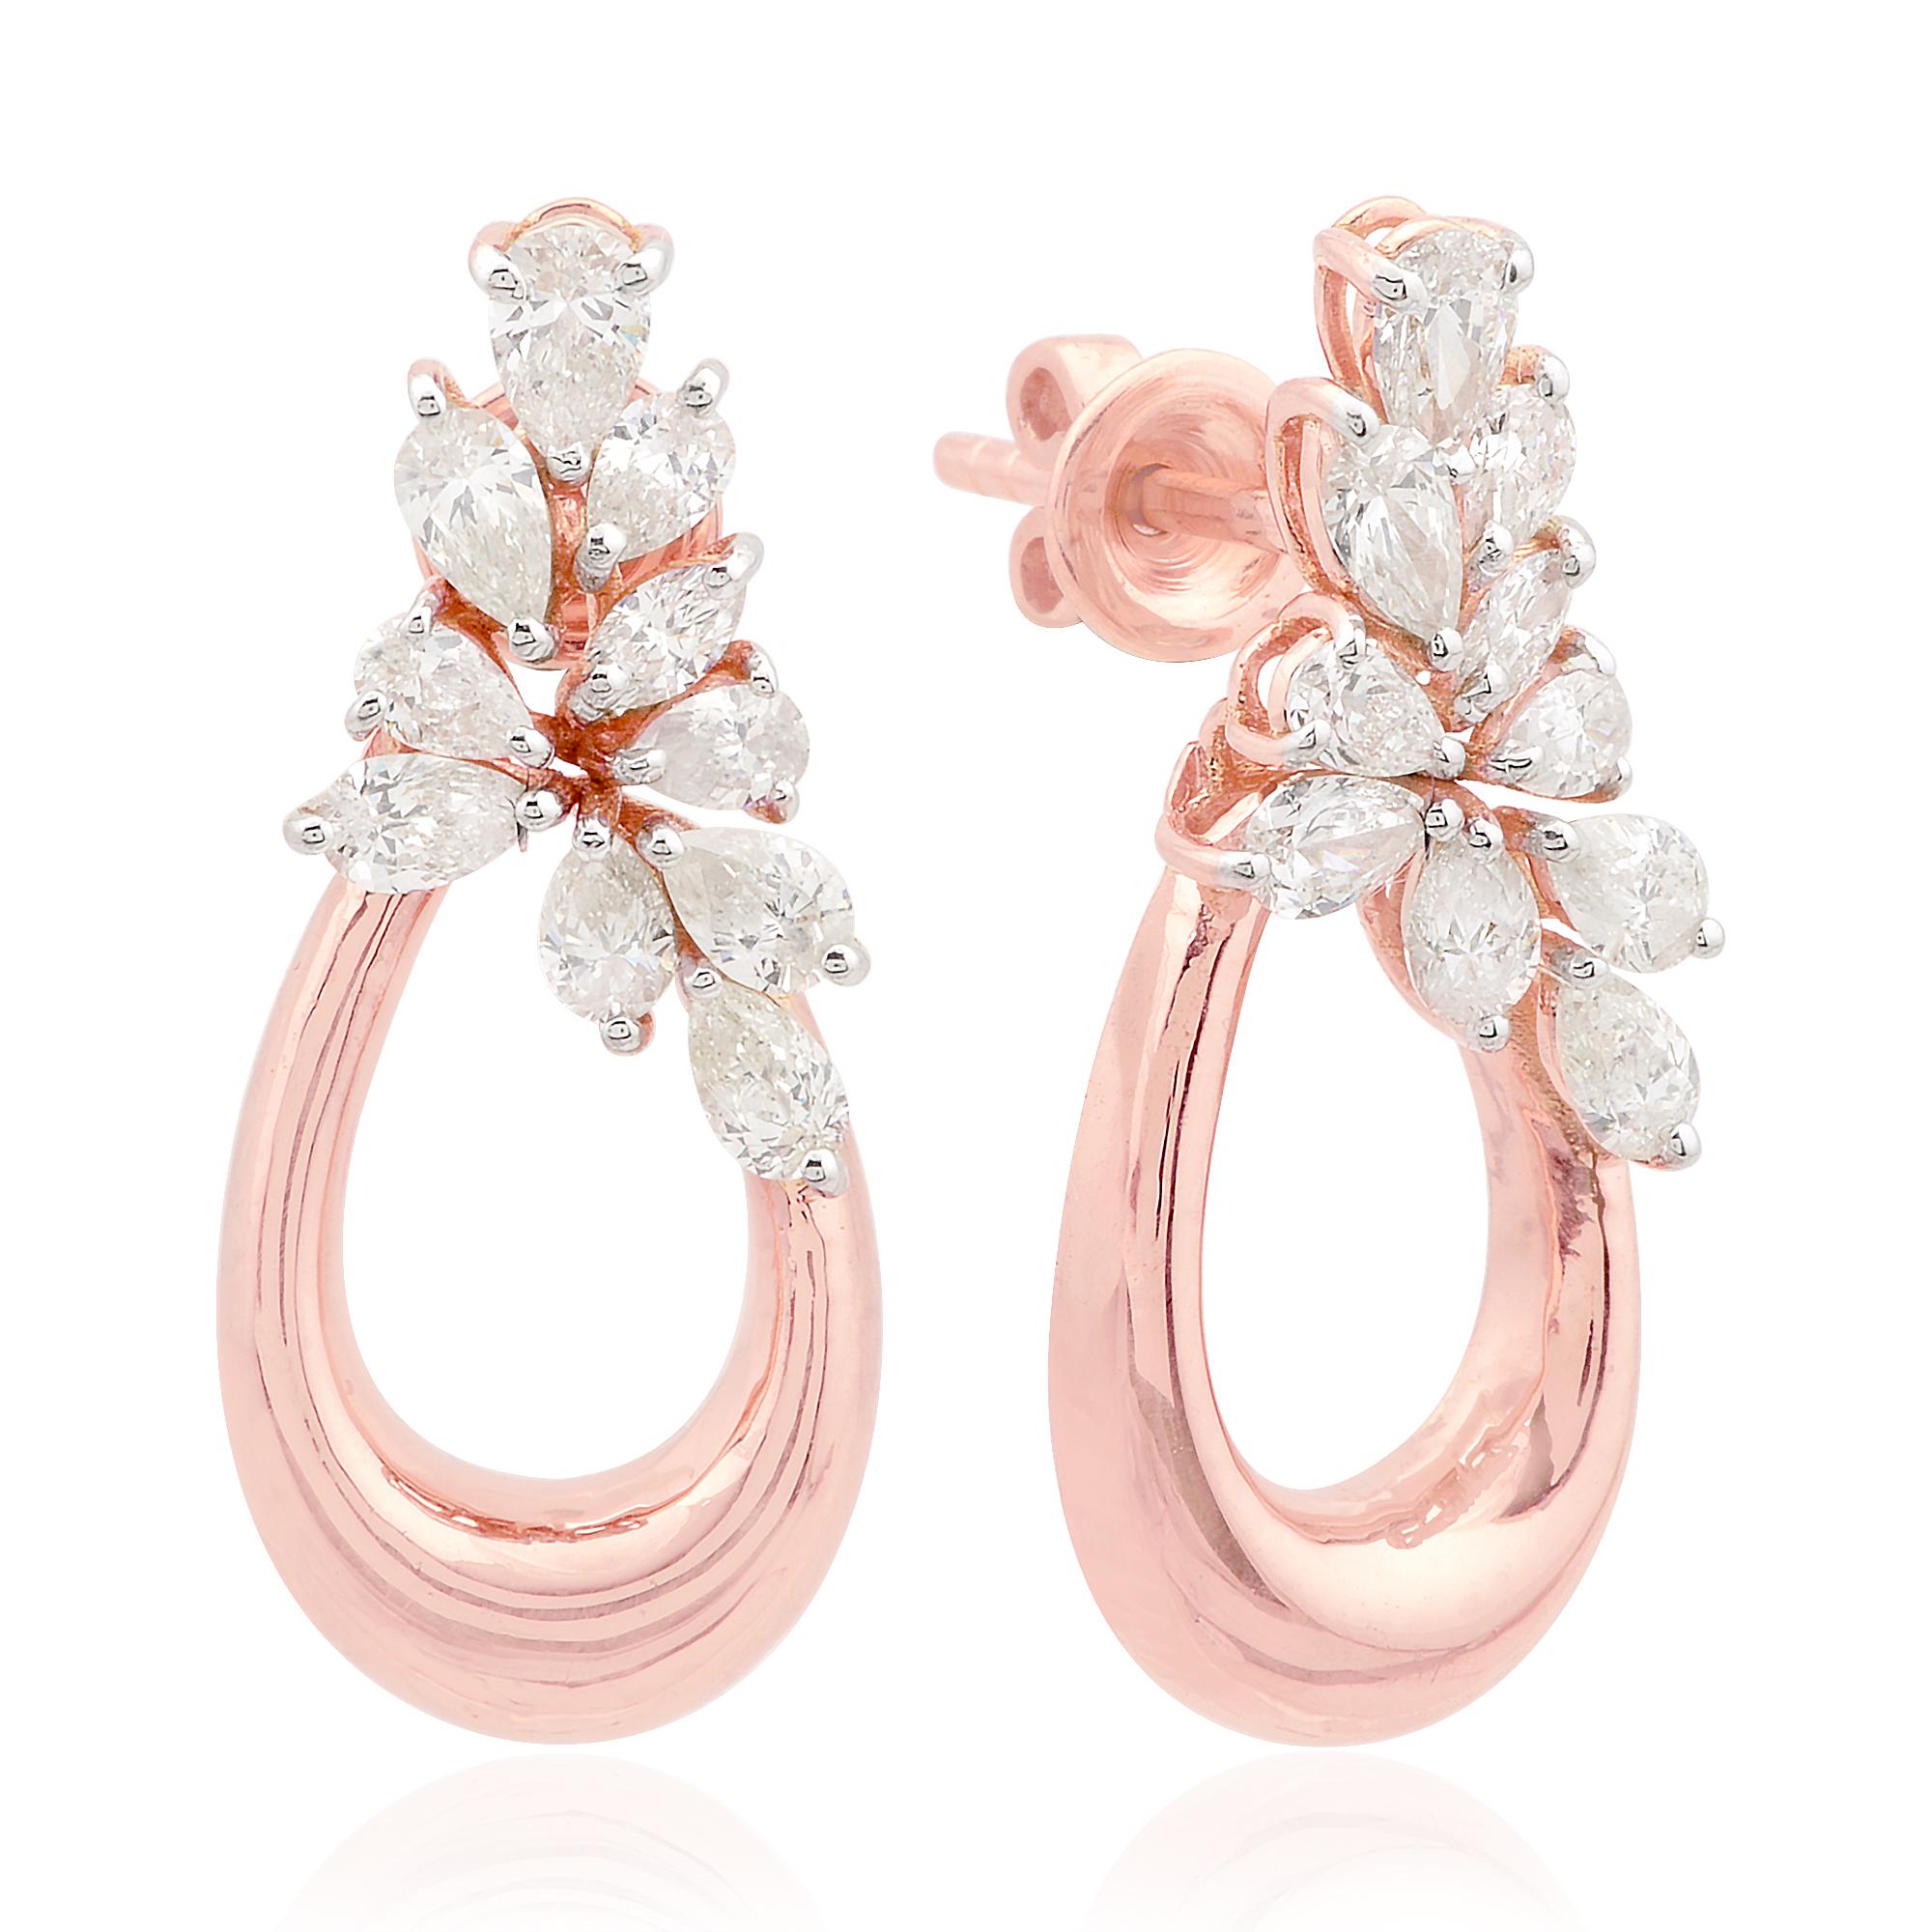 Item Code :- SEE-1924
Gross Wt. :- 4.67 gm
18k Solid Rose Gold Wt. :- 4.41 gm
Natural Diamond Wt. :- 1.30 Ct. ( AVERAGE DIAMOND CLARITY SI1-SI2 & COLOR H-I )
Earrings Size :- 26 mm approx.

✦ Sizing
.....................
We can adjust most items to